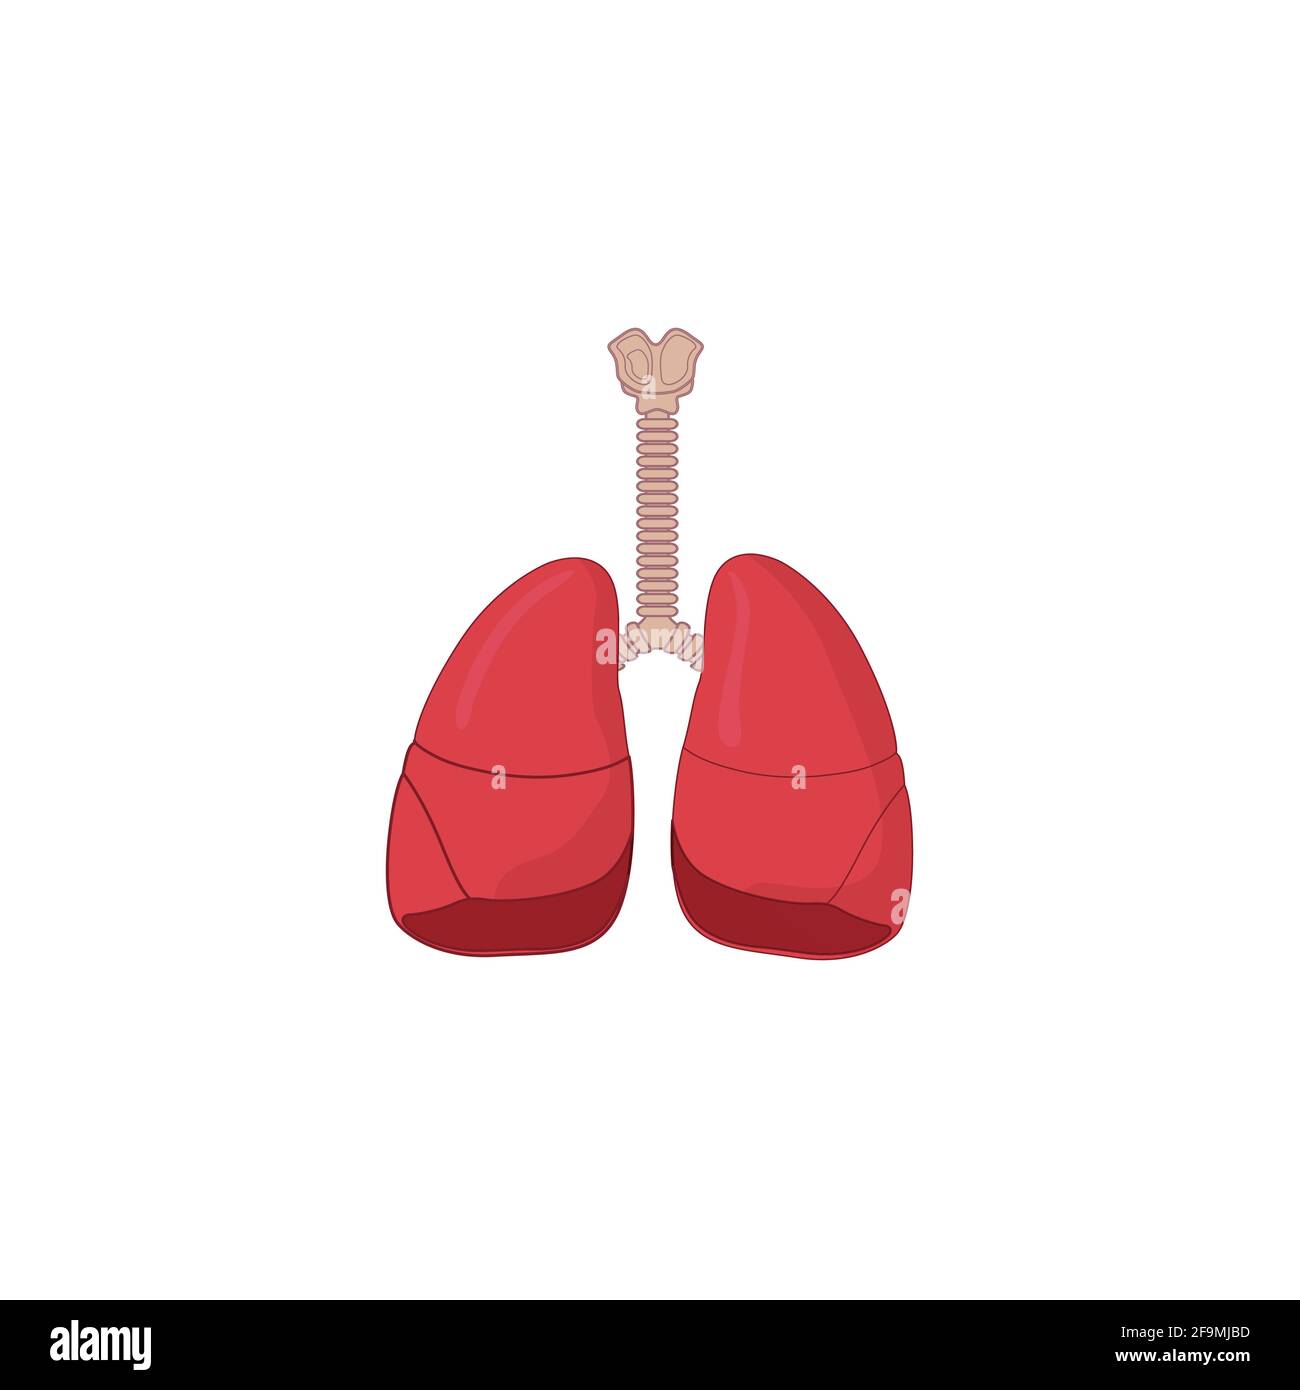 Human Respiratory System Icon Vector Illustration isolated on white background. Breathe, bronchi, bronchiole, bronchus, lung, lungs icon for medical Stock Vector